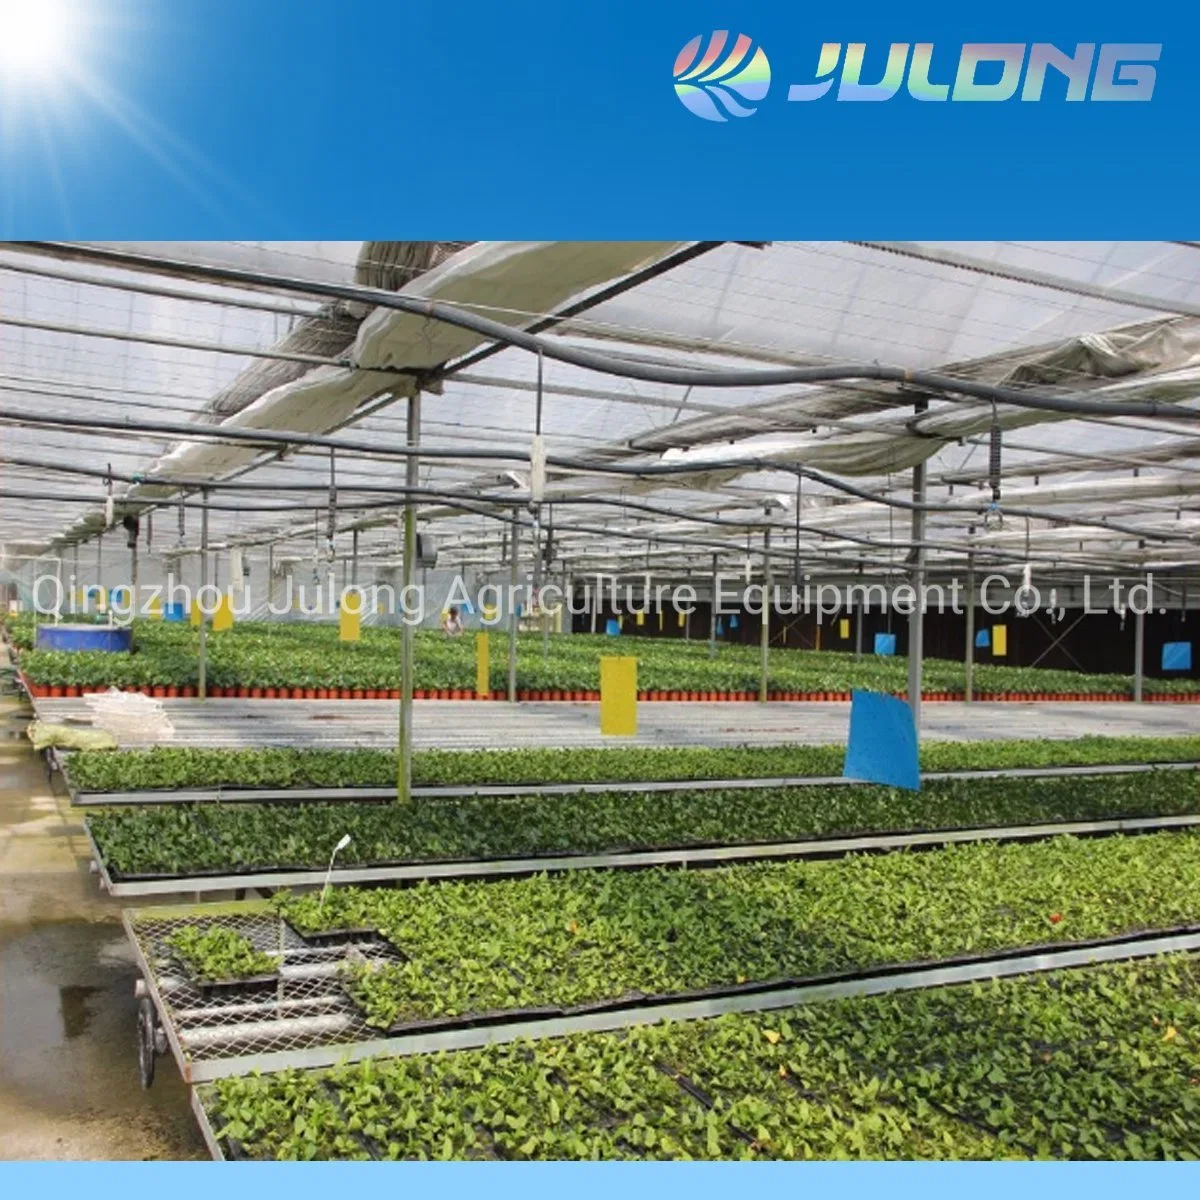 Low Cost Plastic Film Greenhouse for Planting Vegetables and Fruits